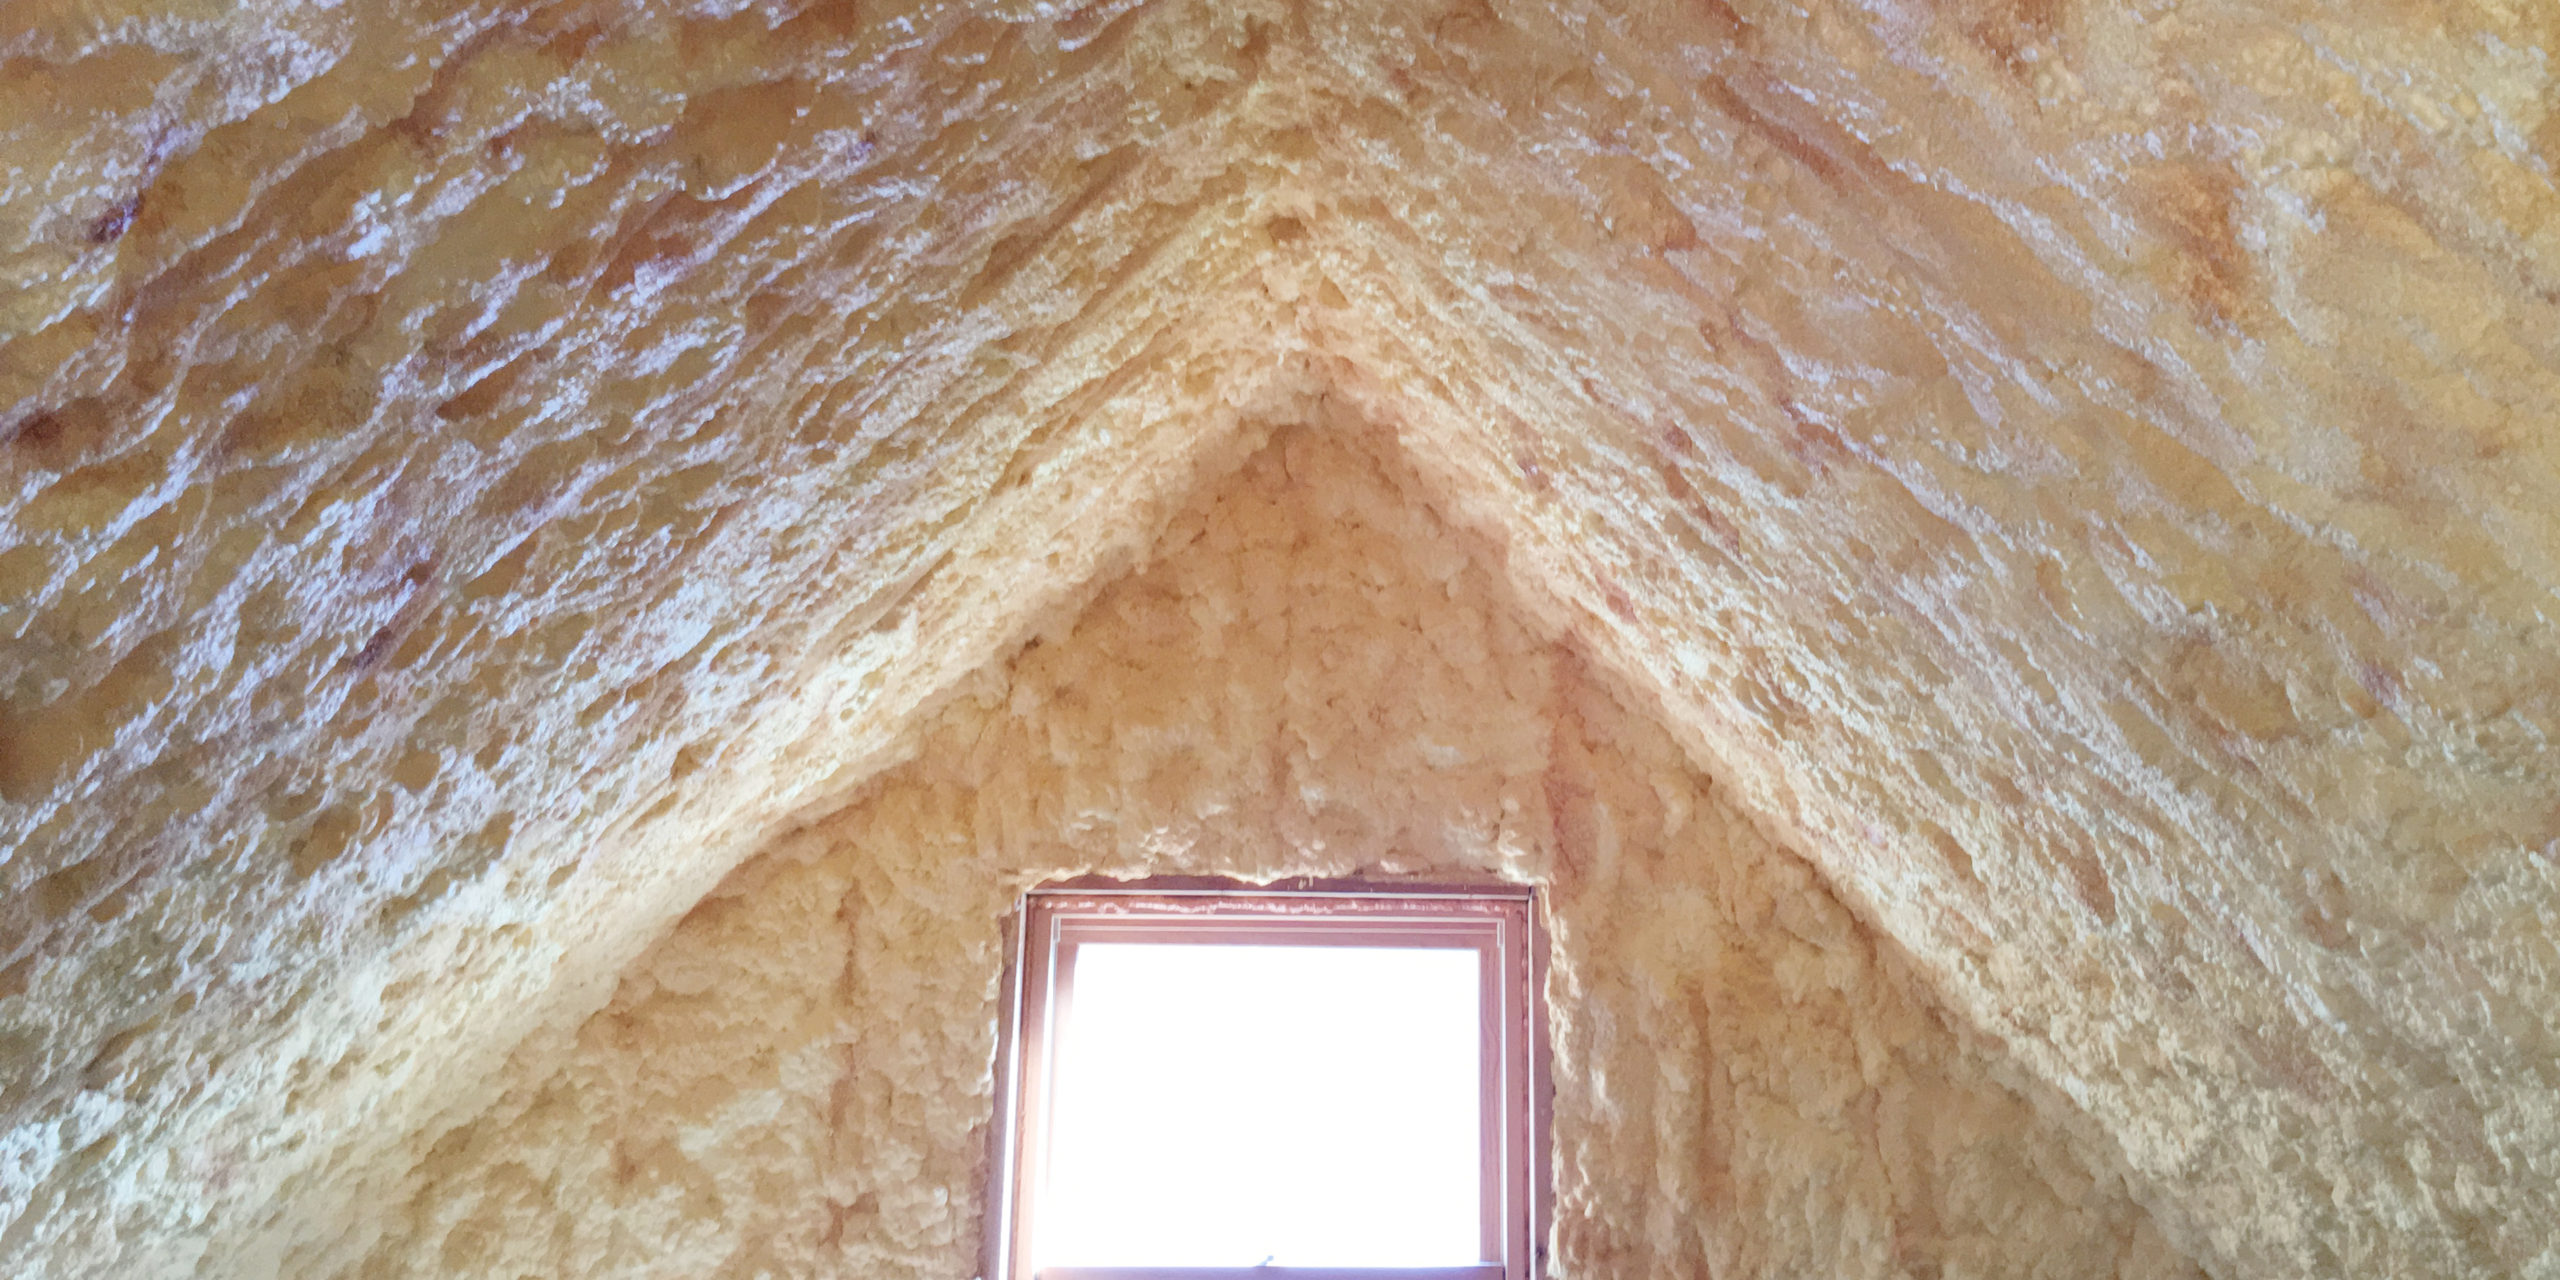 11insulation inside of a peaked attic roof